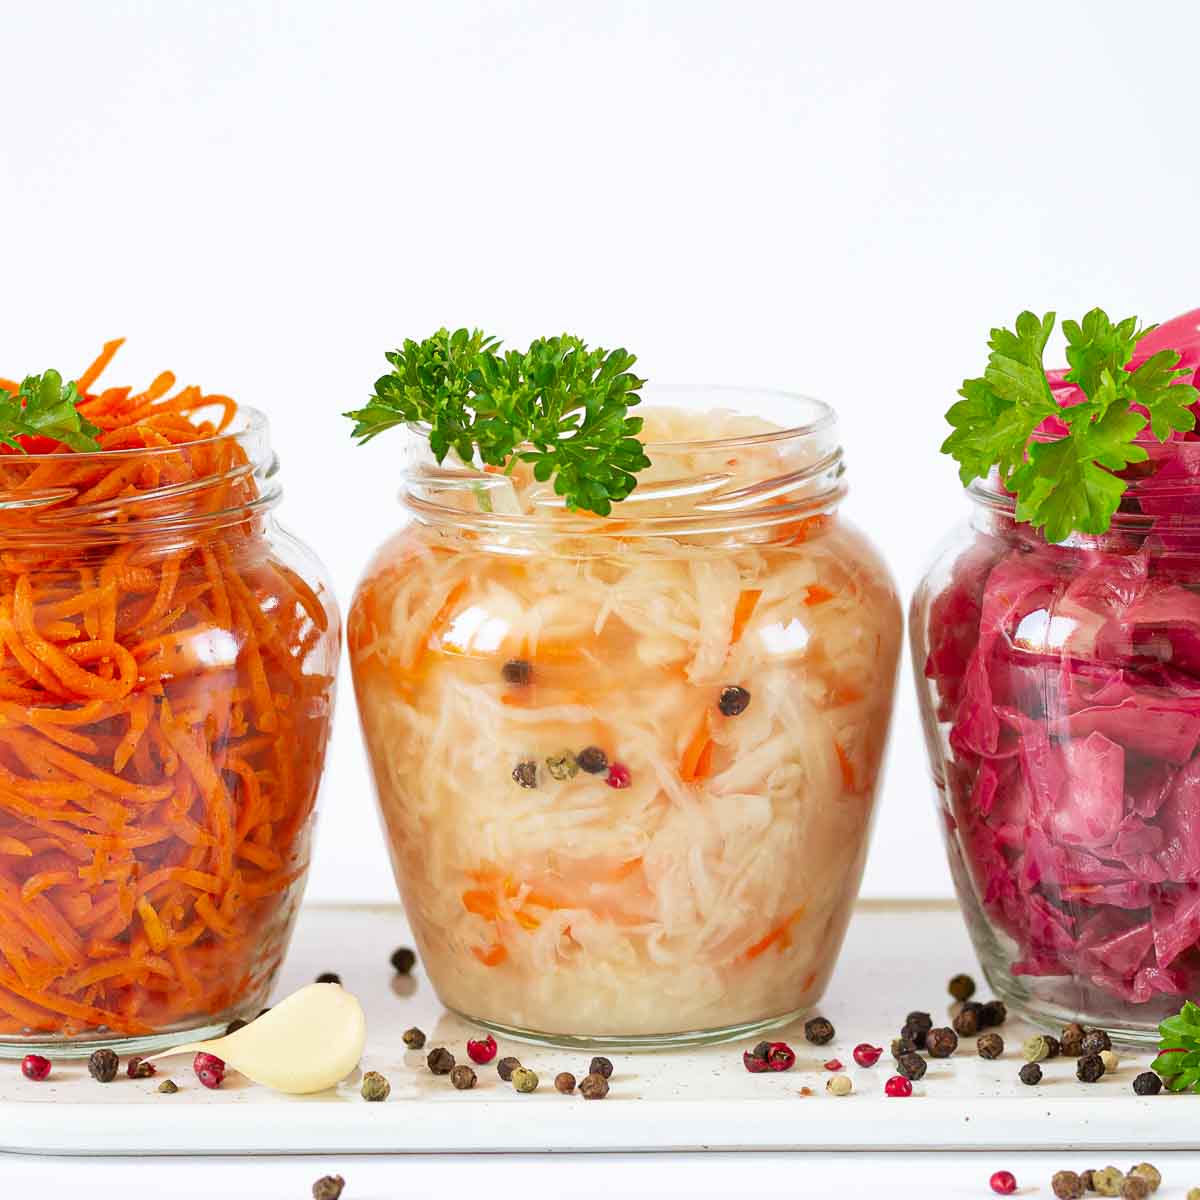 Sauerkraut, marinated red cabbage and carrot in open glass jars on ceramic board.